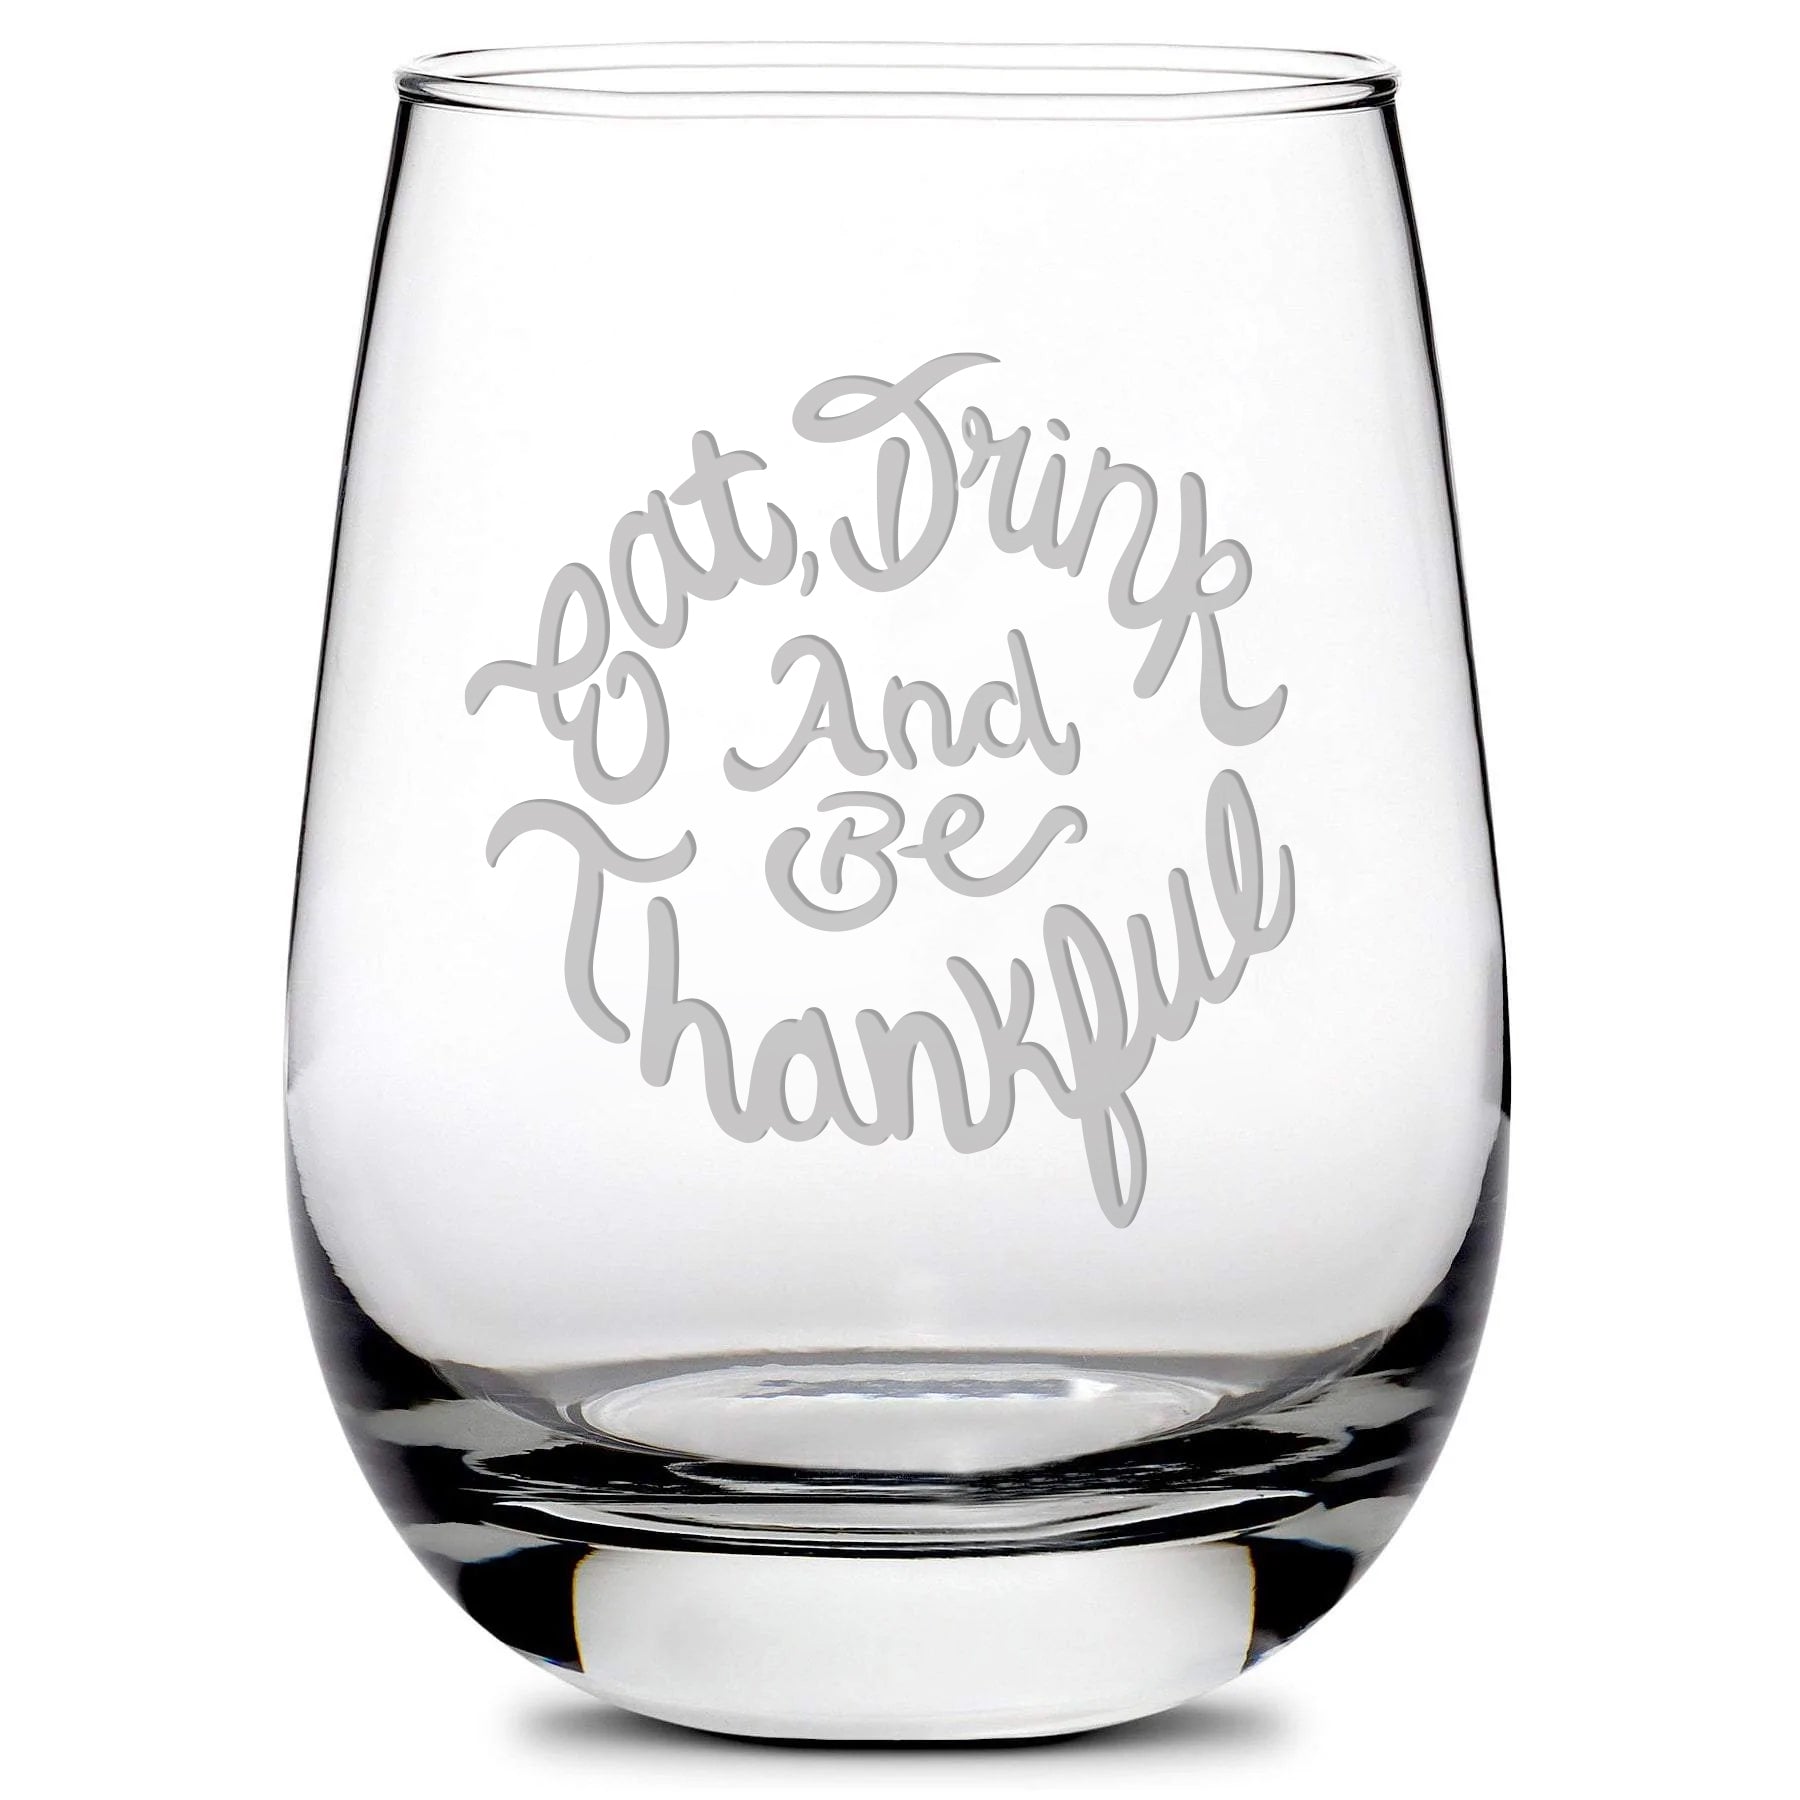 Premium Stemless Wine Glass, "Eat, Drink and Be Thankful", Hand Etched, Made in USA, 16oz, Laser Etched or Hand Etched